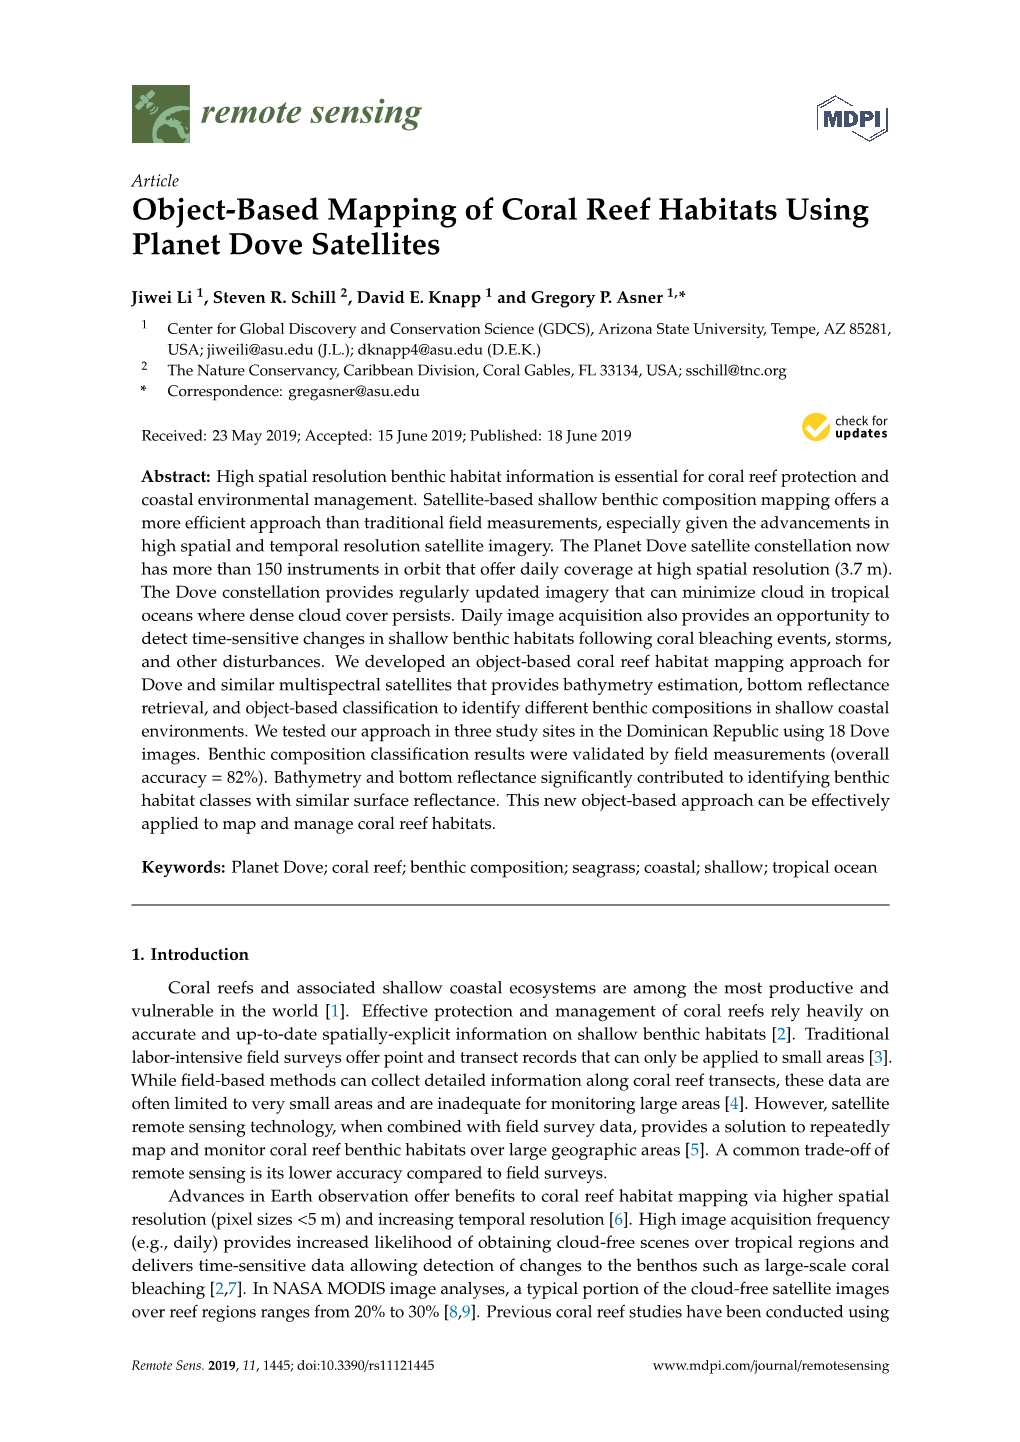 Object-Based Mapping of Coral Reef Habitats Using Planet Dove Satellites